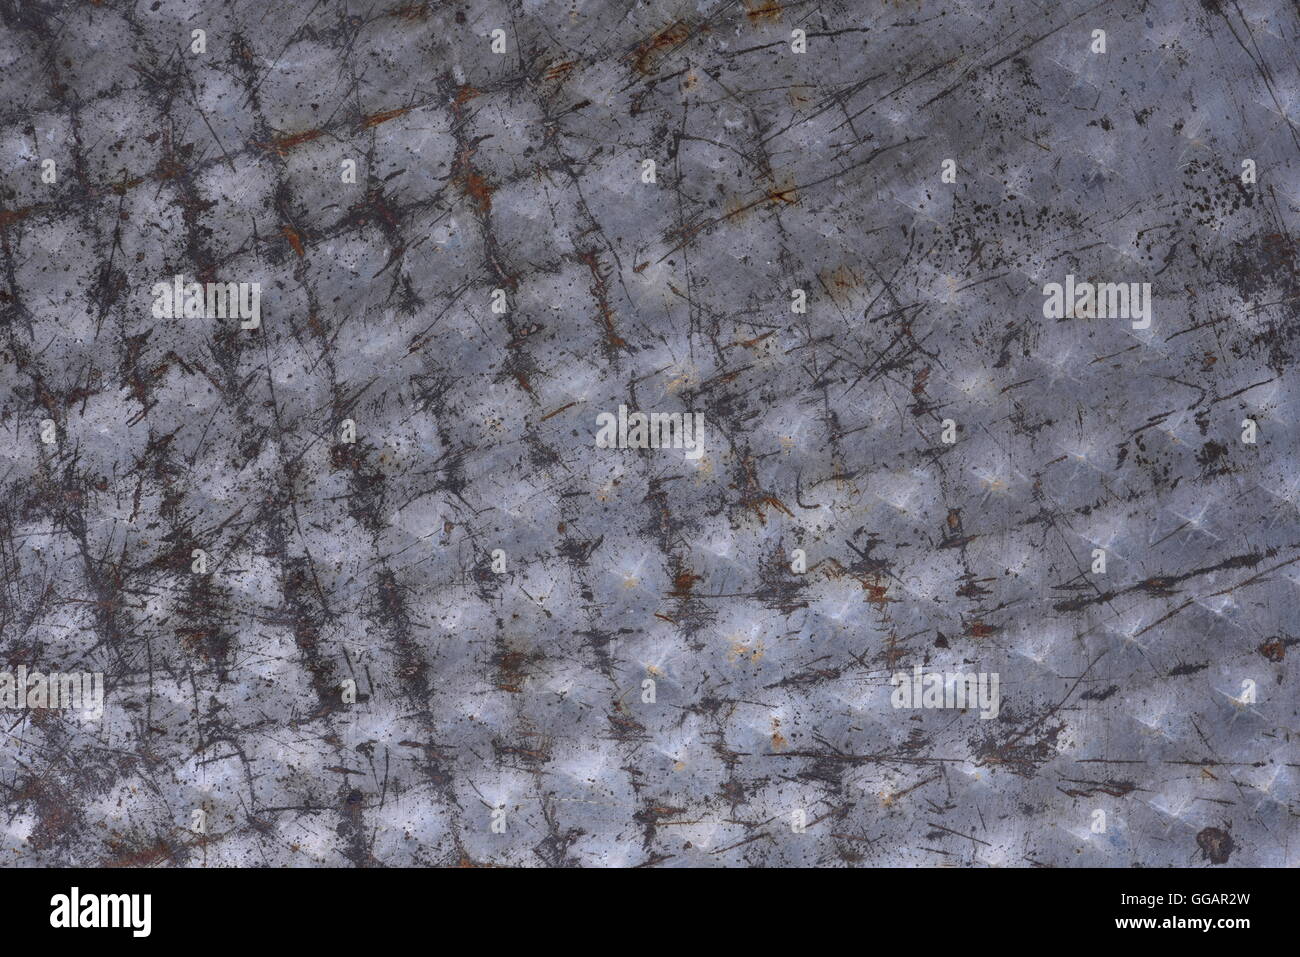 Texture of metal surface Stock Photo